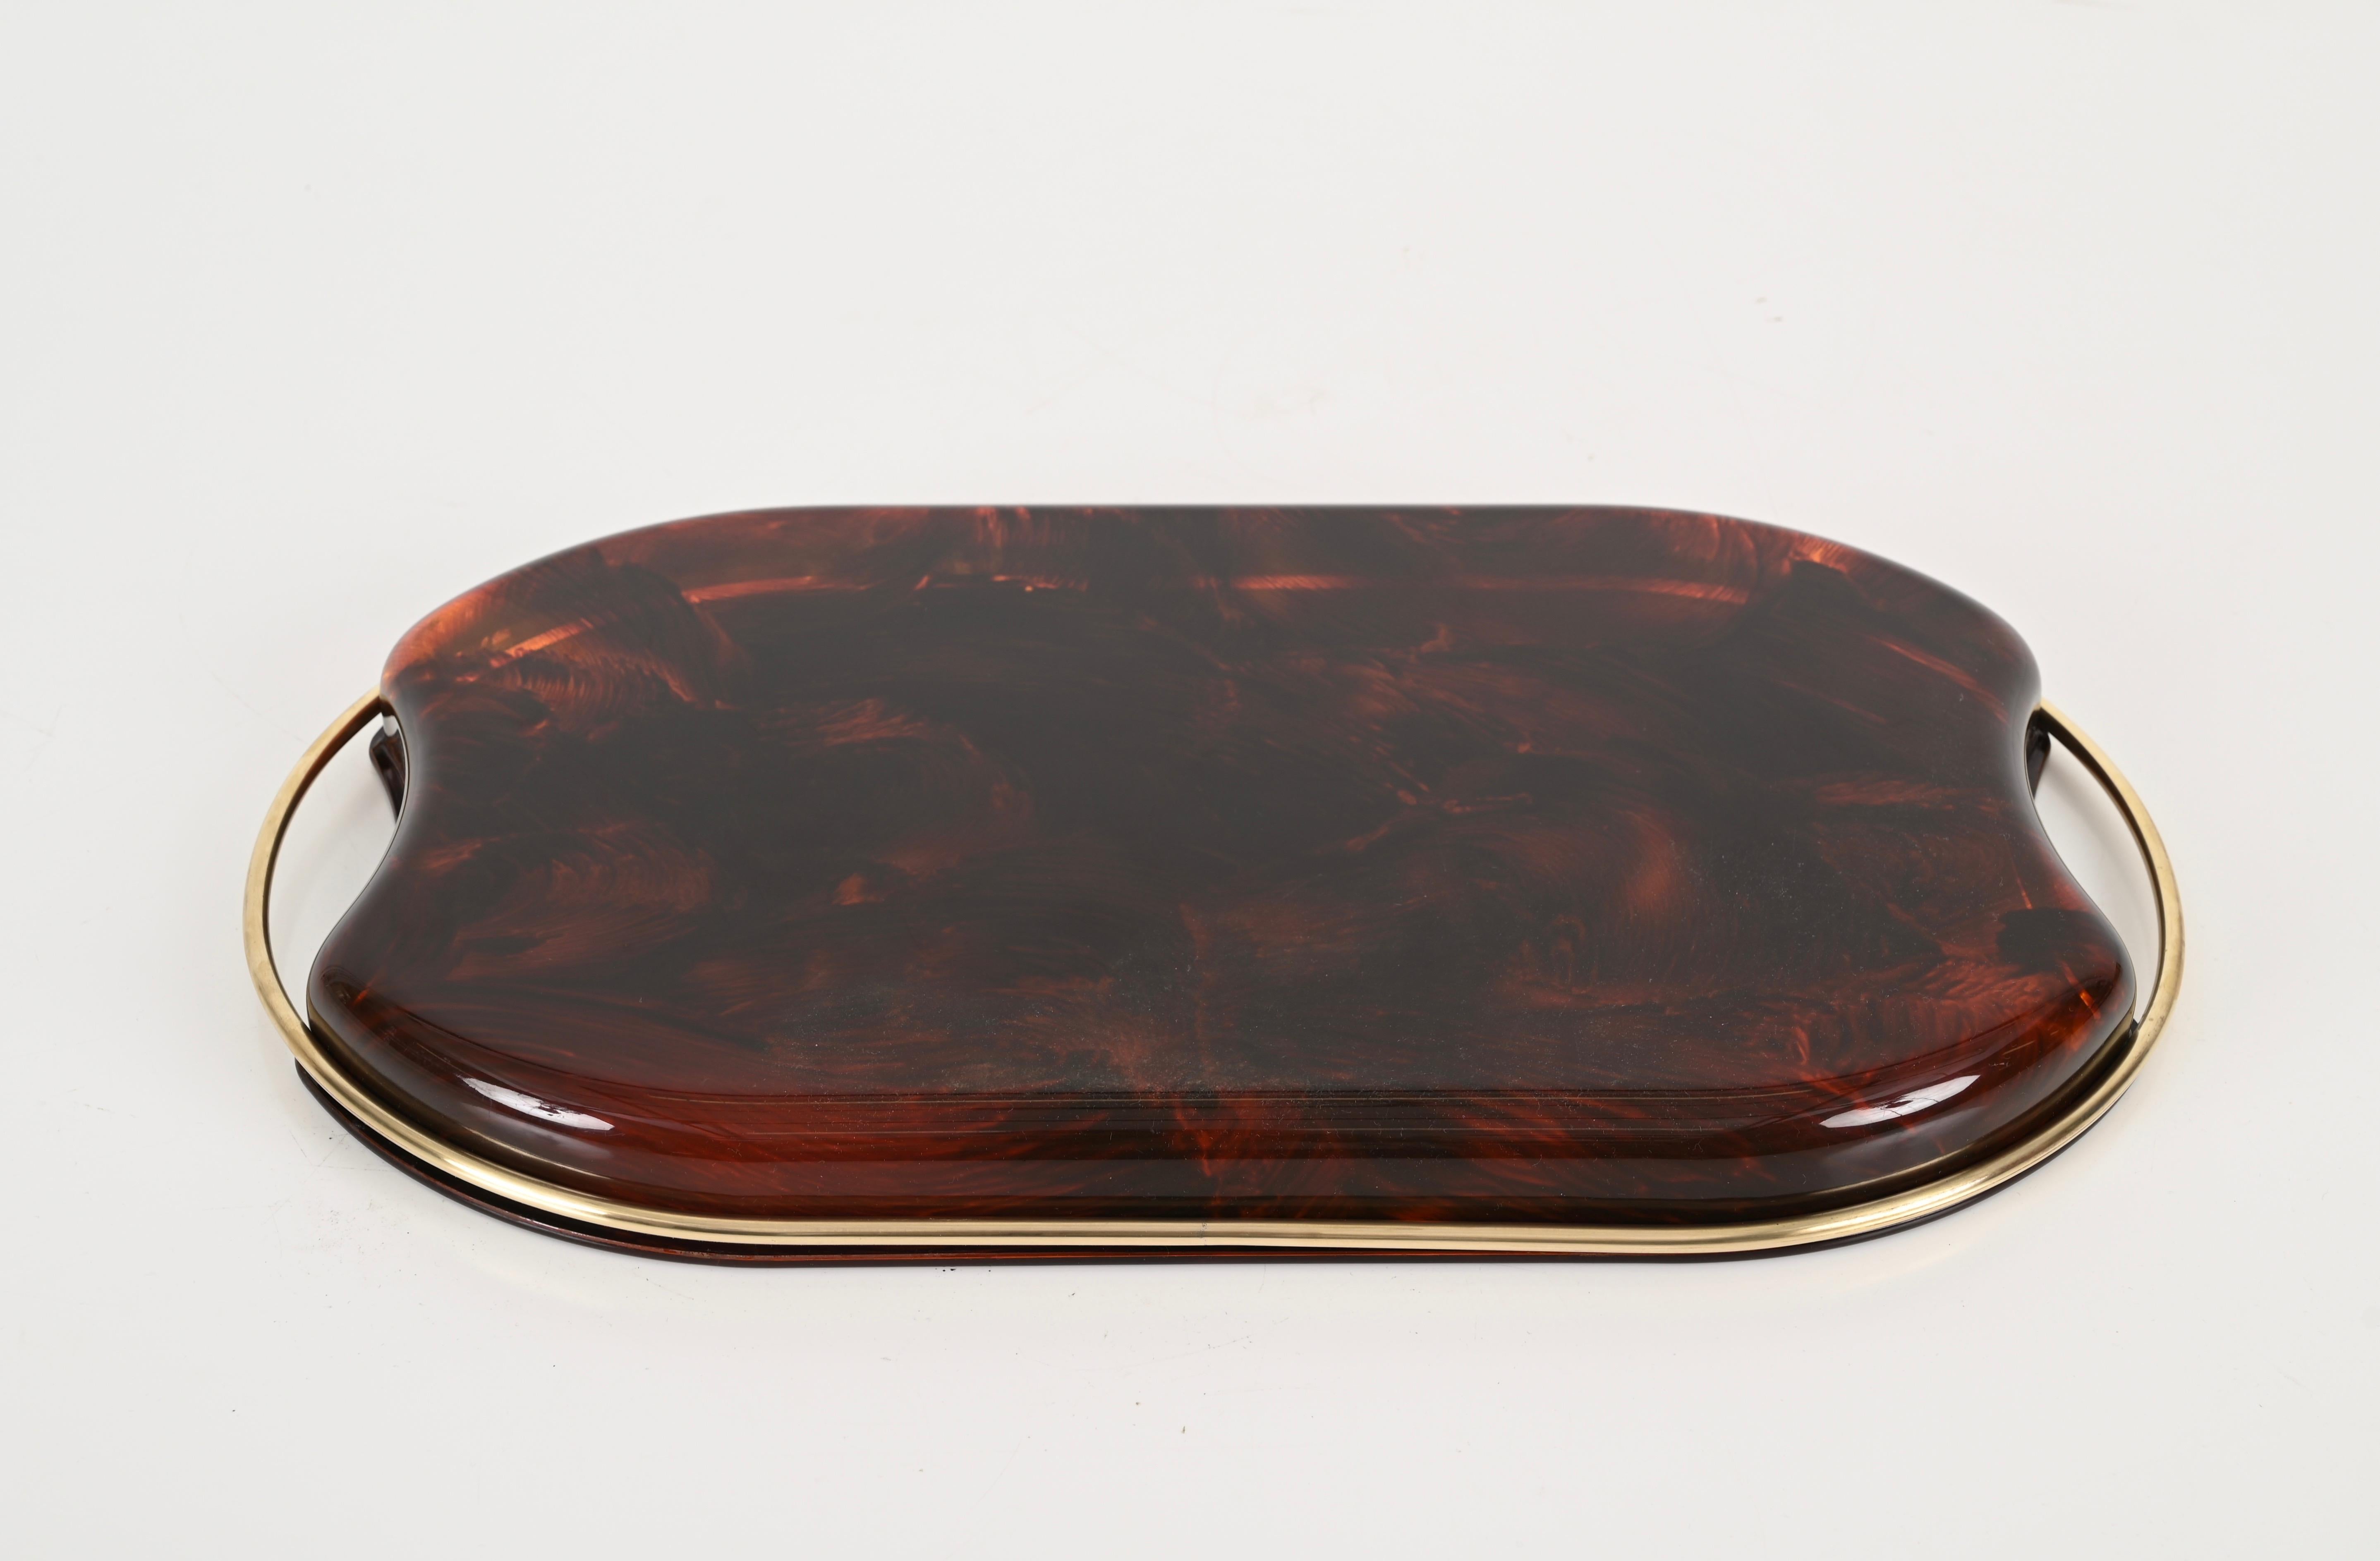 Midcentury Modern By Guzzini Italian Lucite and Brass Oval Serving Tray, 1970s For Sale 4